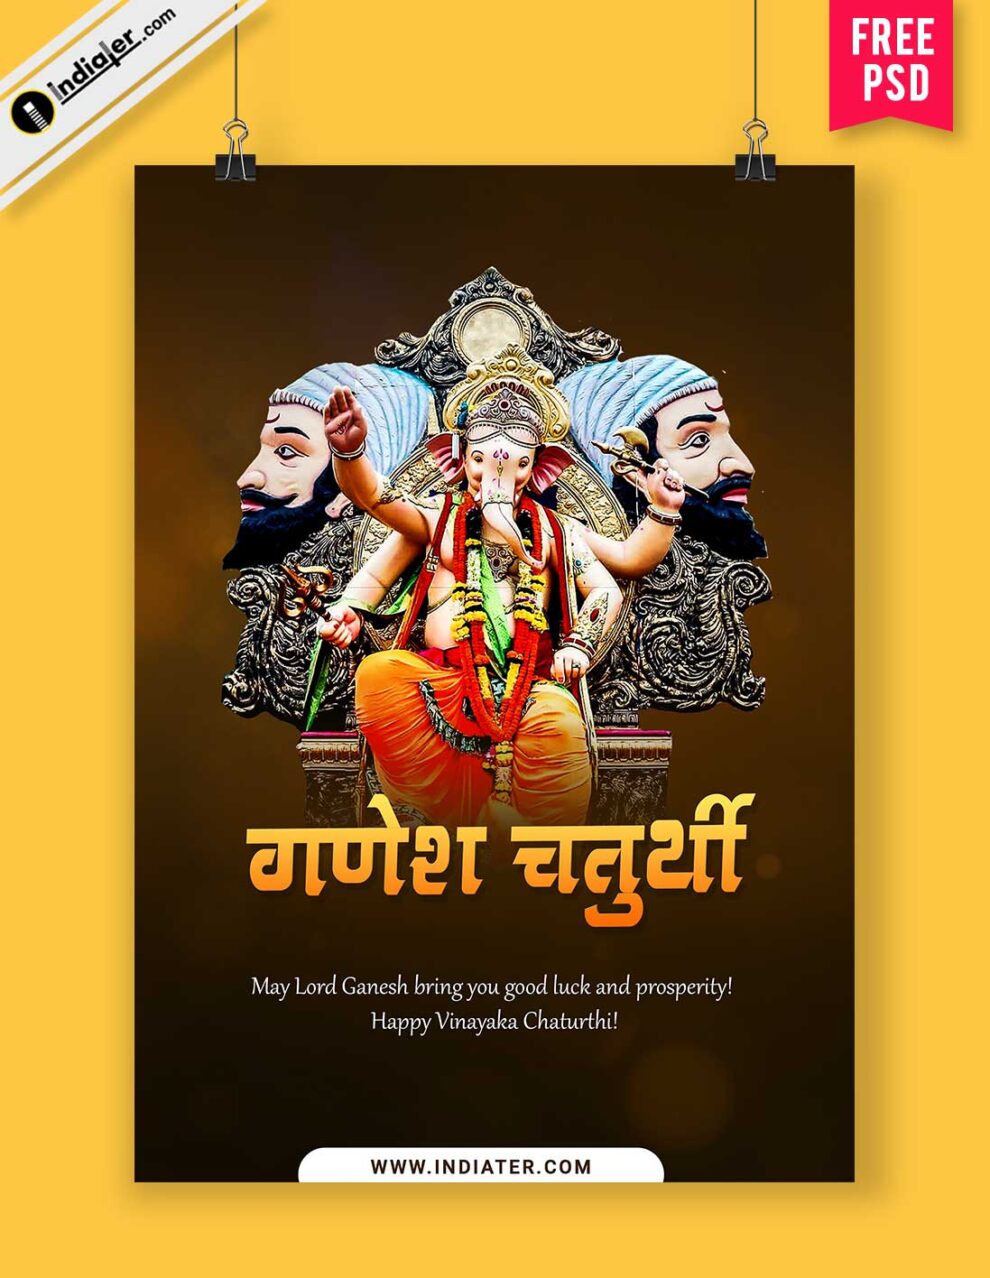 Free Poster PSD Template Ganesh Chaturthi - Indiater